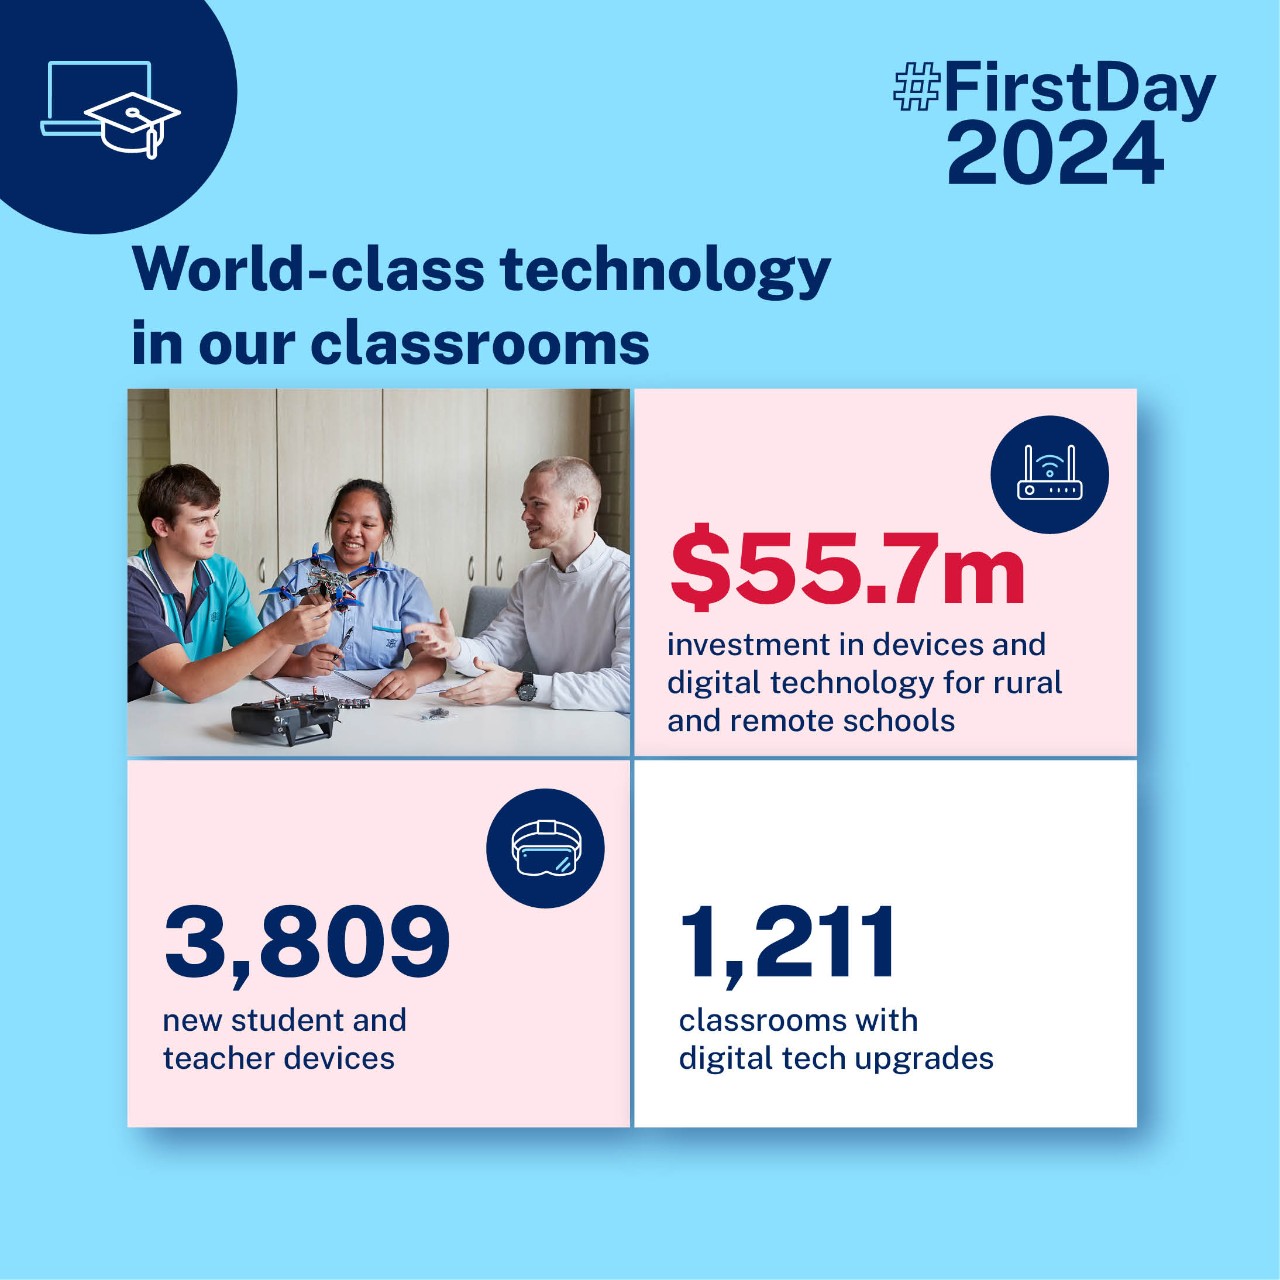 Infographic about Technology such as 55.7m investment in devices and digital technology for rural and remote schools 3,809 new student and teacher devices 1,211 classroooms with digital tech upgrades